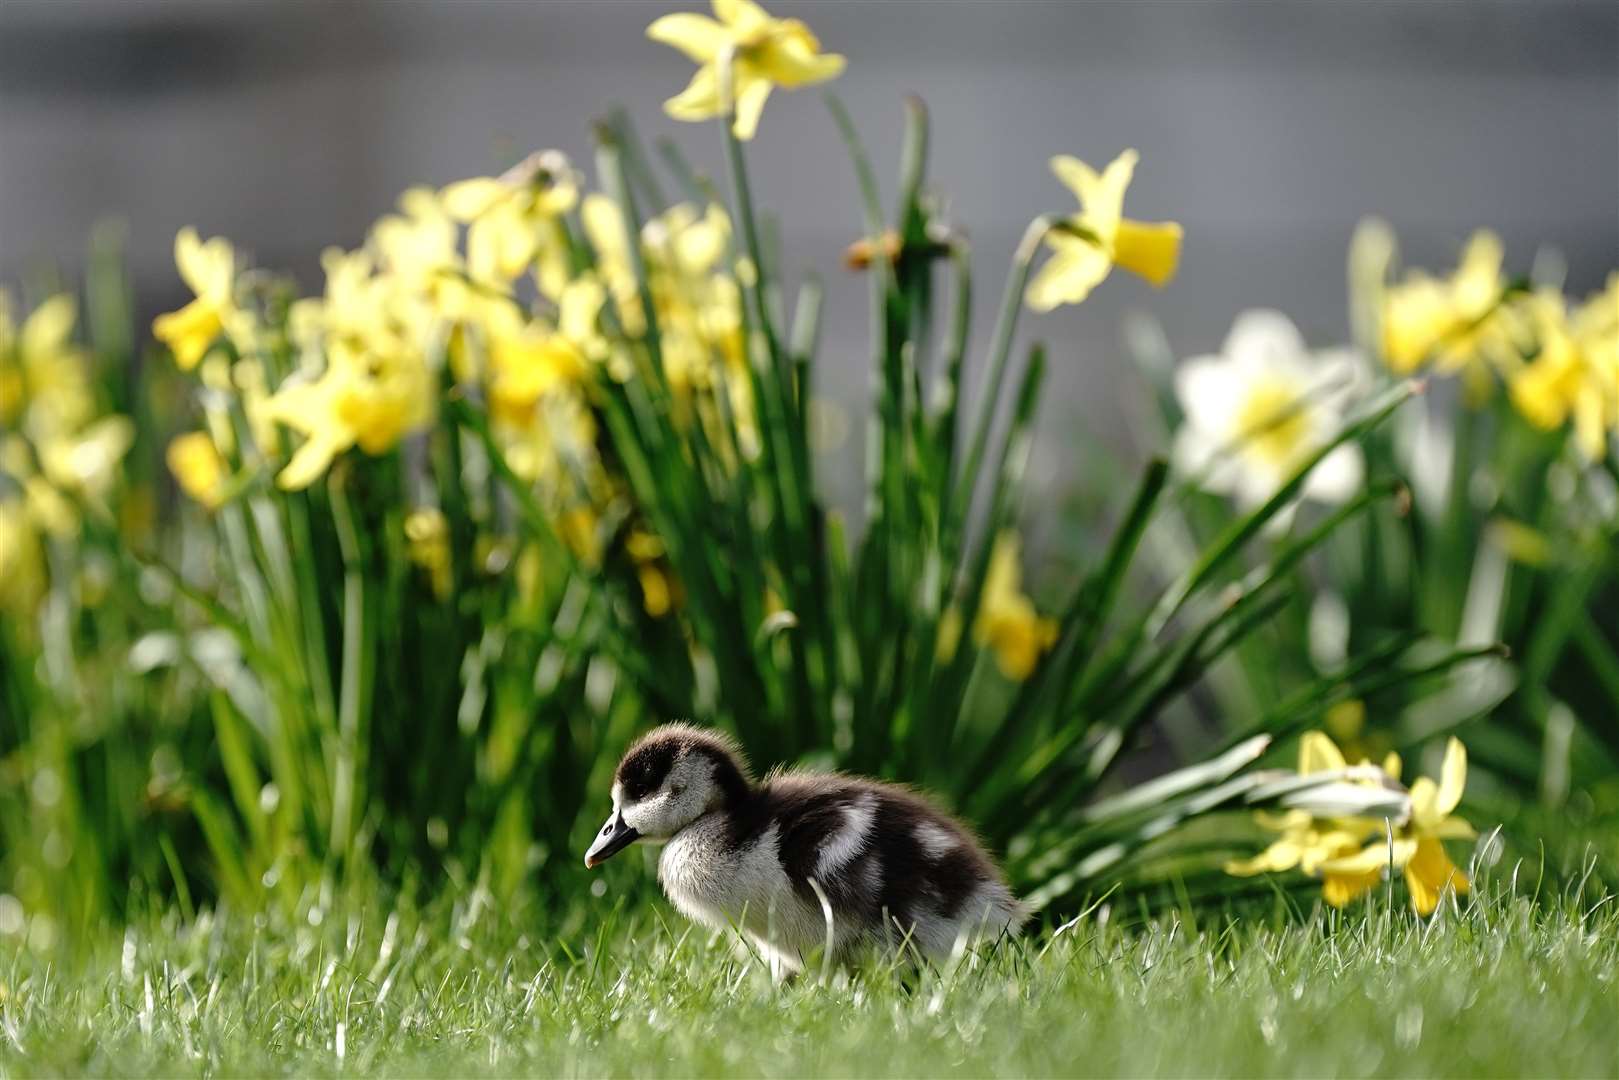 Flowers including snowdrops, crocuses and daffodils have come into bloom in the mild weather (Aaron Chown/PA)